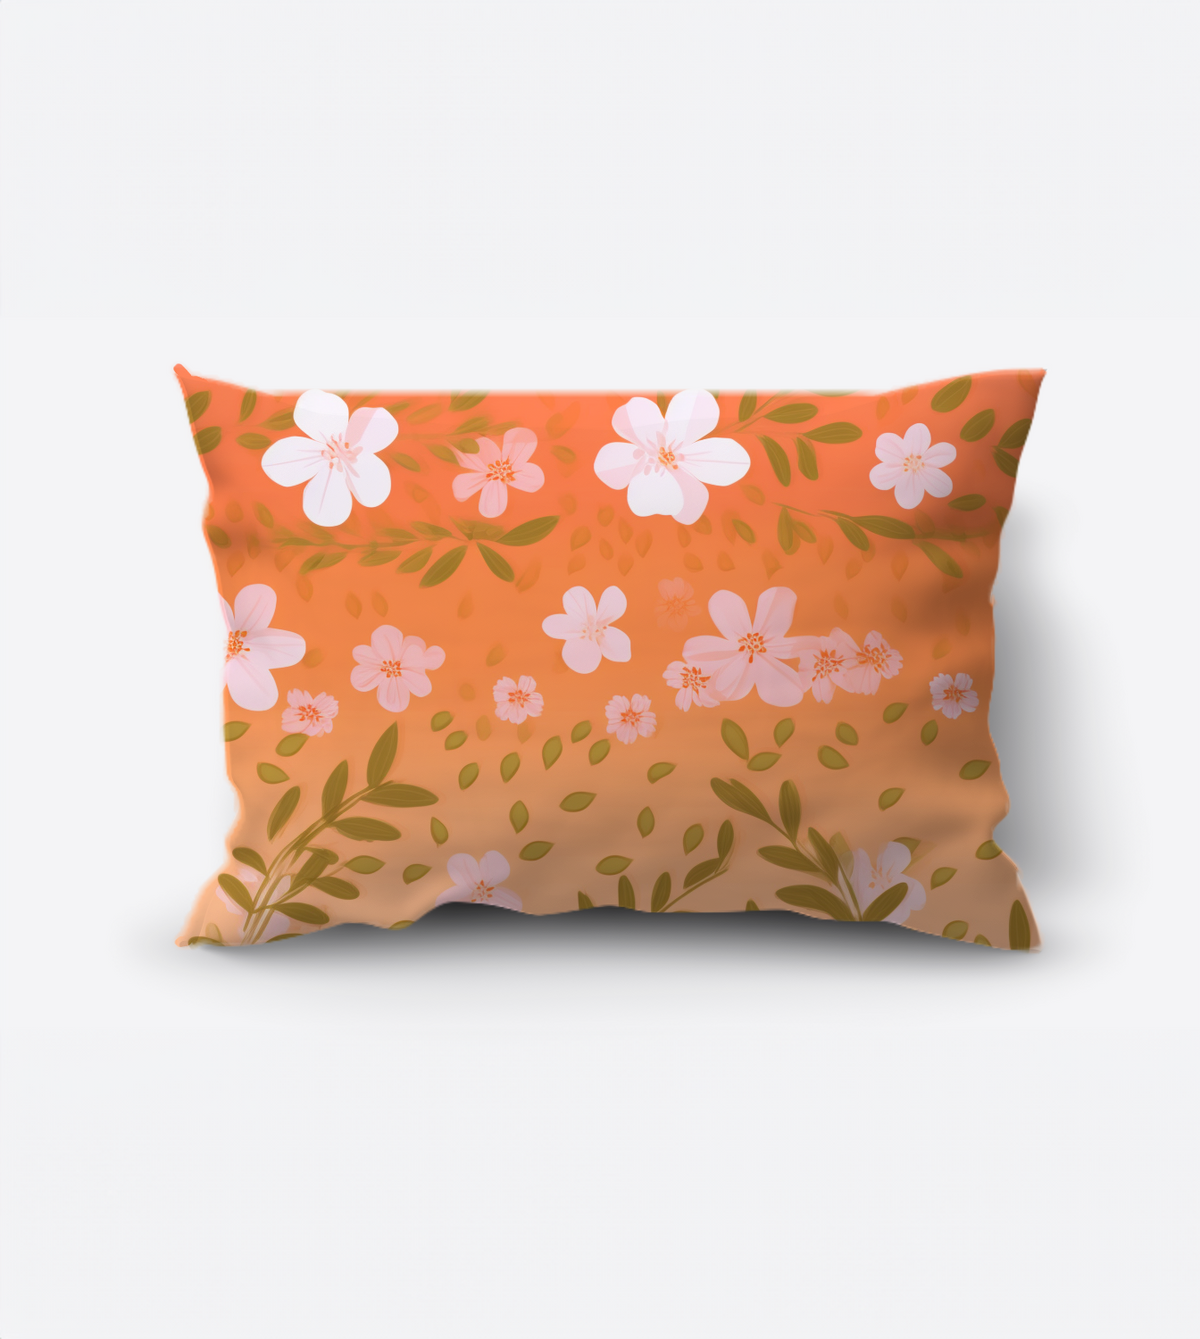 Peach Floral Blossom Pillowcase | Hypoallergenic - Allergy Friendly - Naturally Free